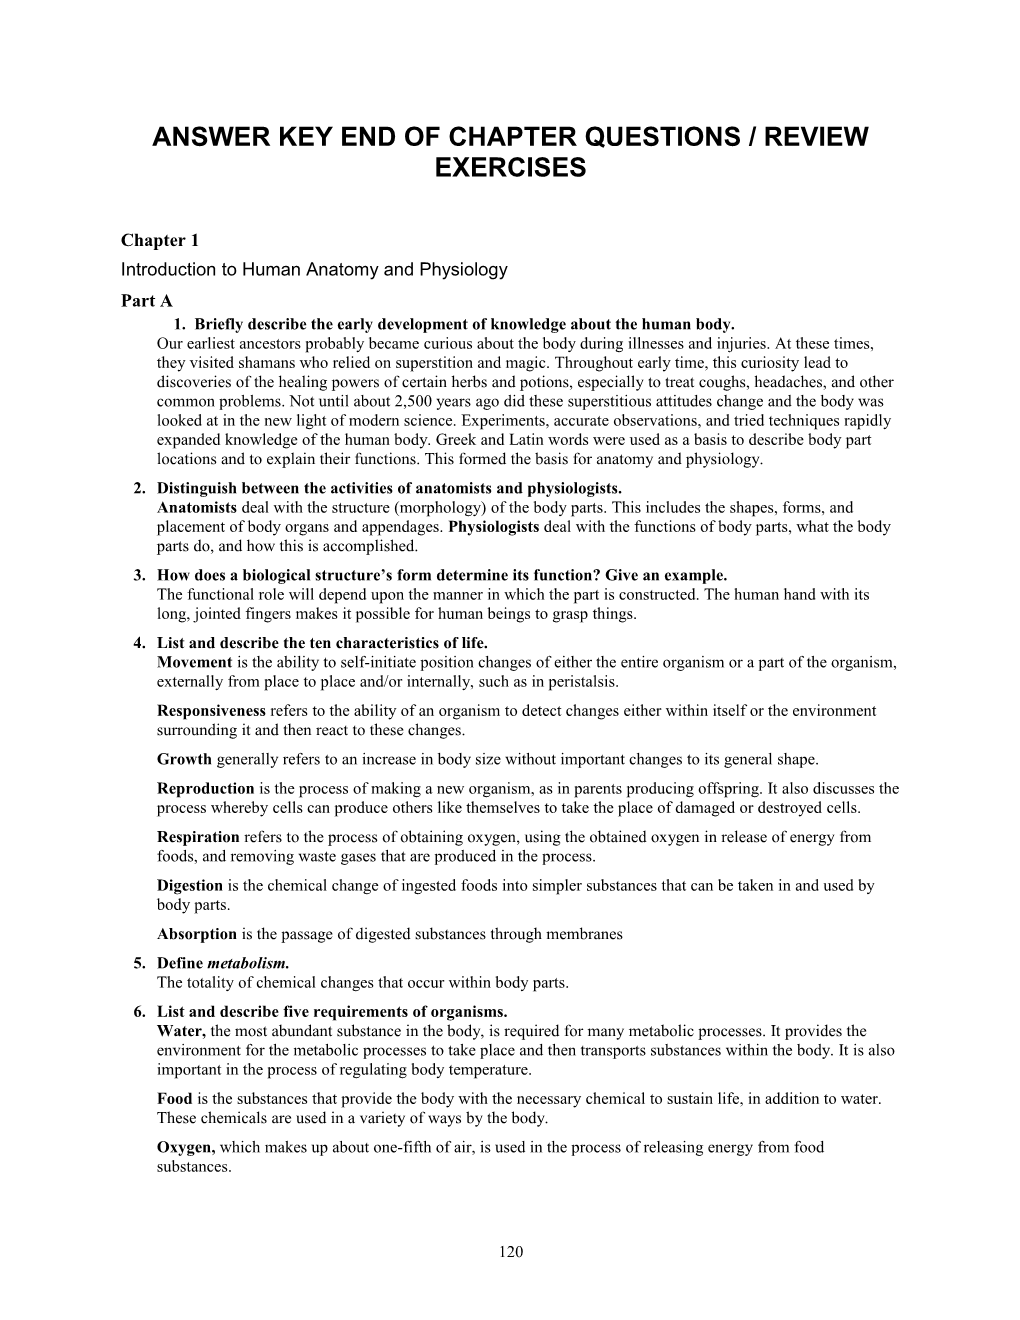 Answer Key End of Chapter Questions / Review Exercises